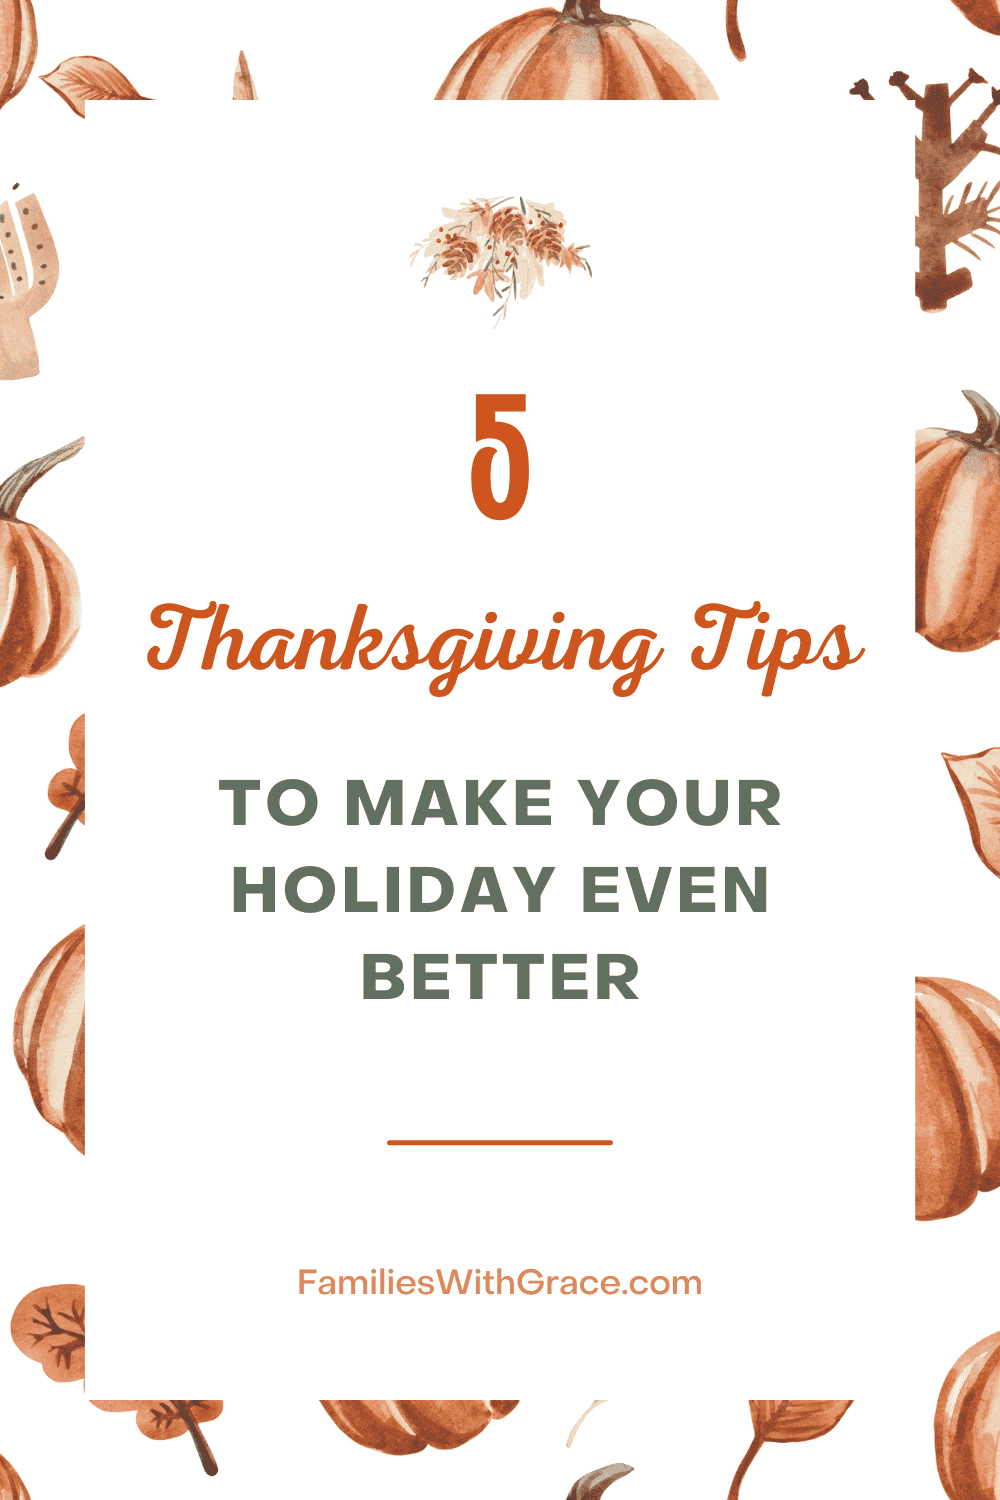 5 Thanksgiving tips to make your holiday even better